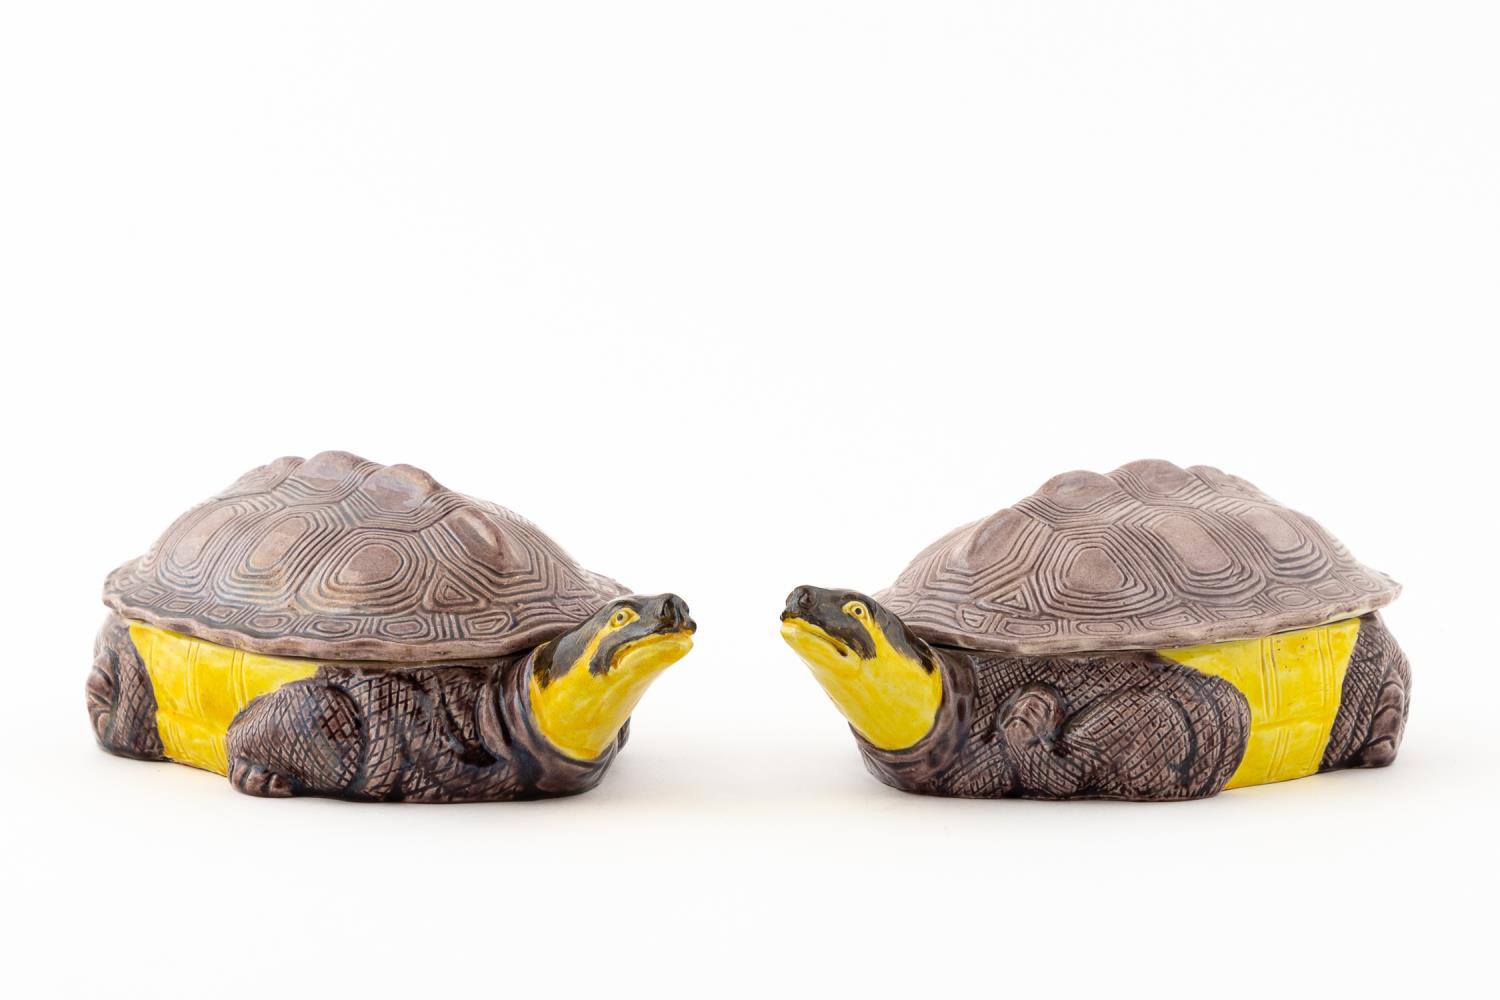 PAIR CHINESE PORCELAIN TURTLE 35c13f